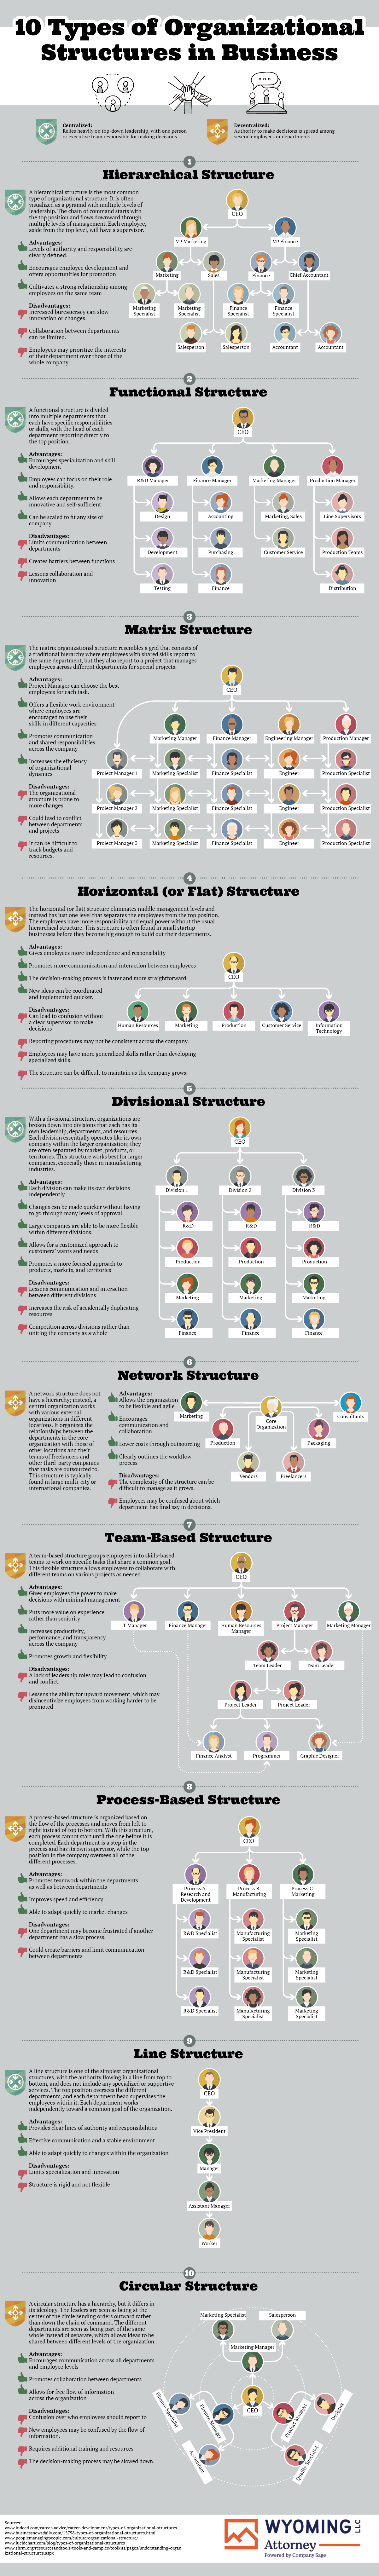 10 Types of Organizational Structures in Business, Illustrated - WyomingLLCAttorney.com - Infographic